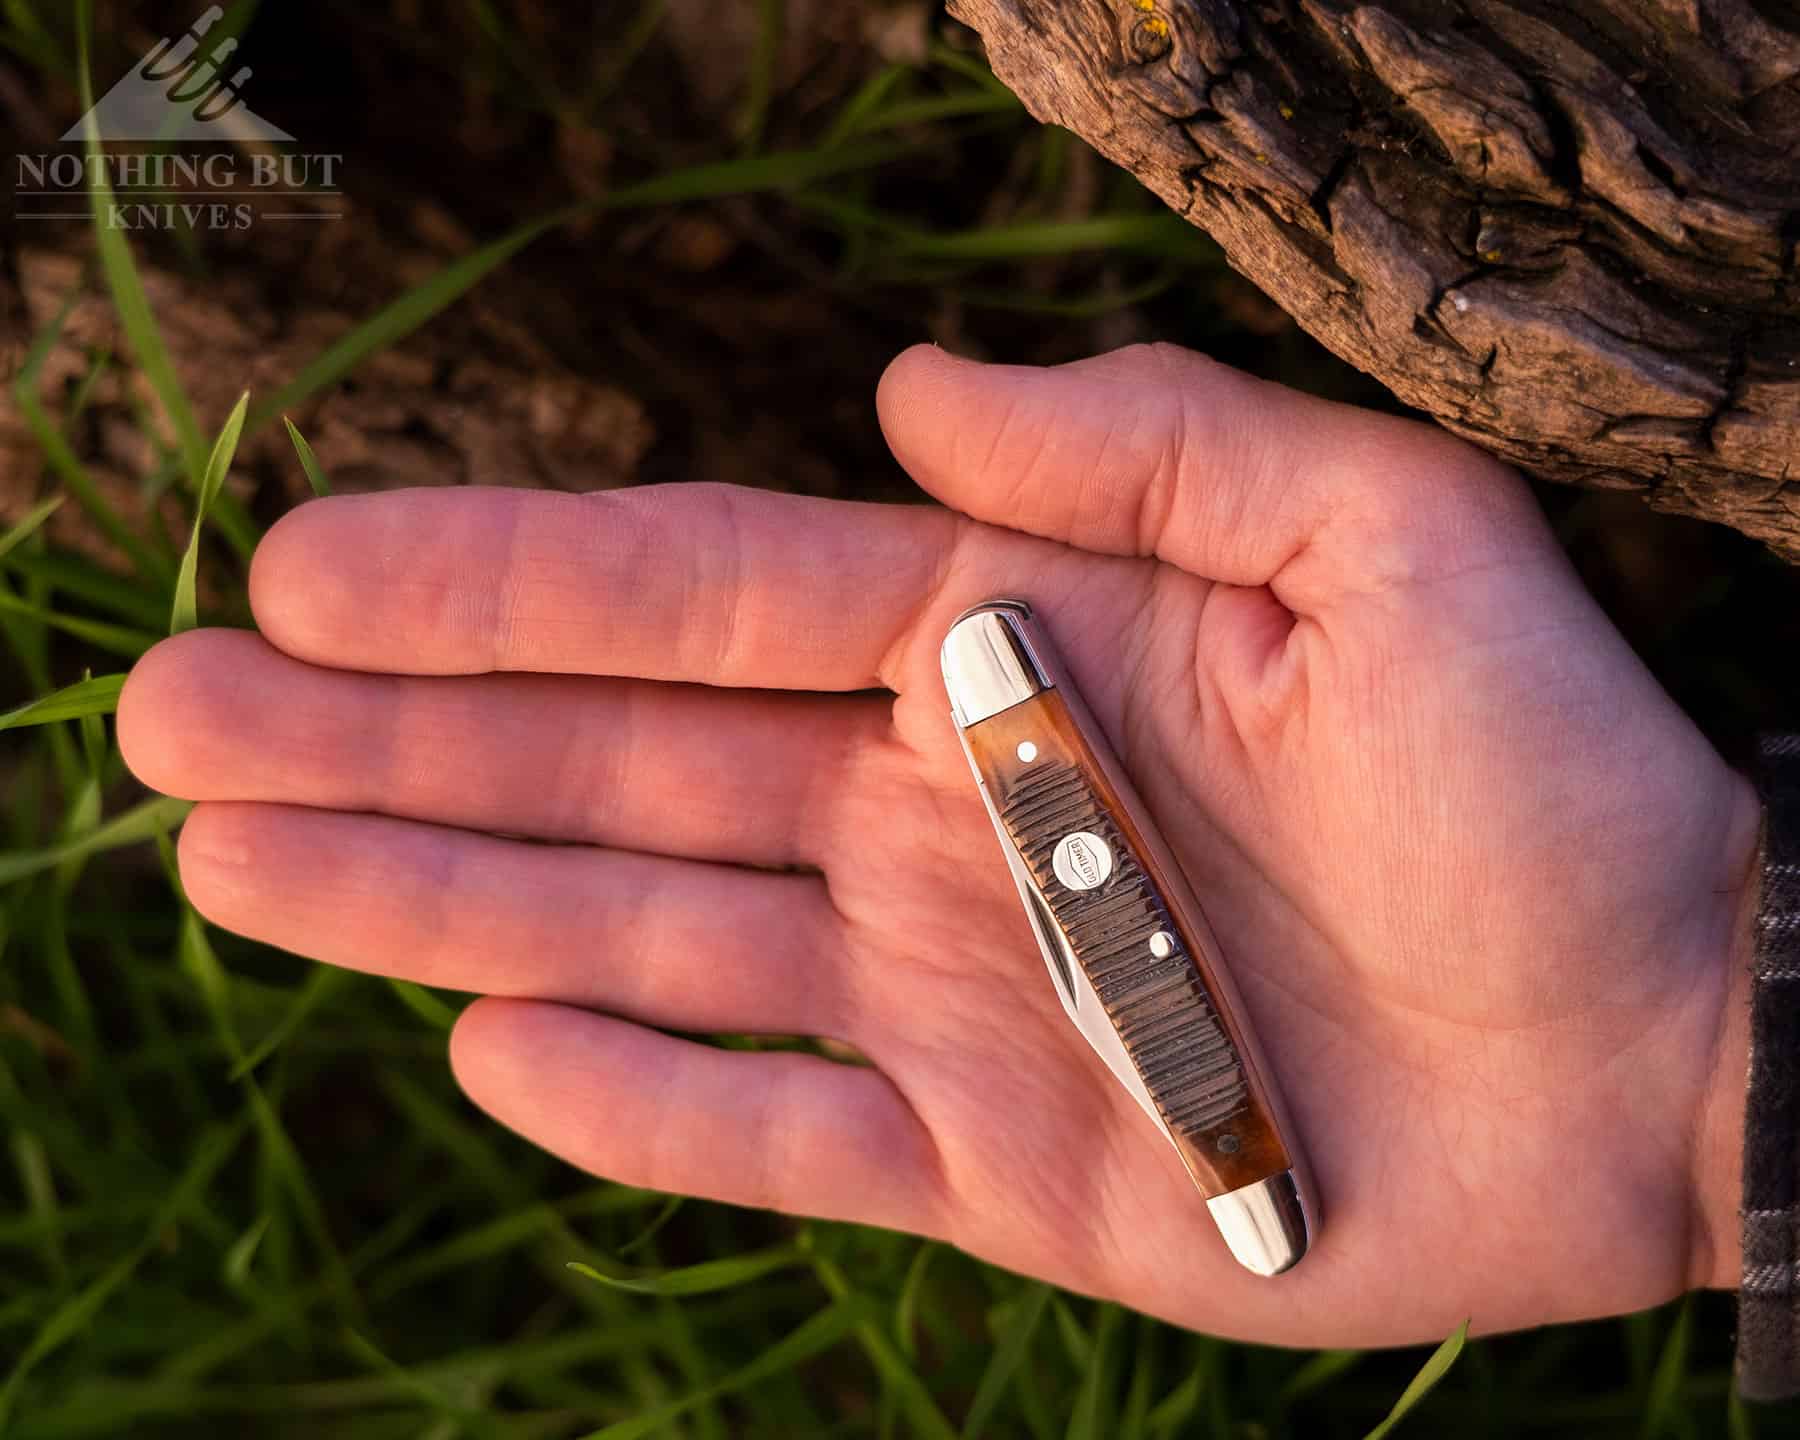 The Middleman Generational 340T in the closed position in the palm of a person's hand to show how small it is. 